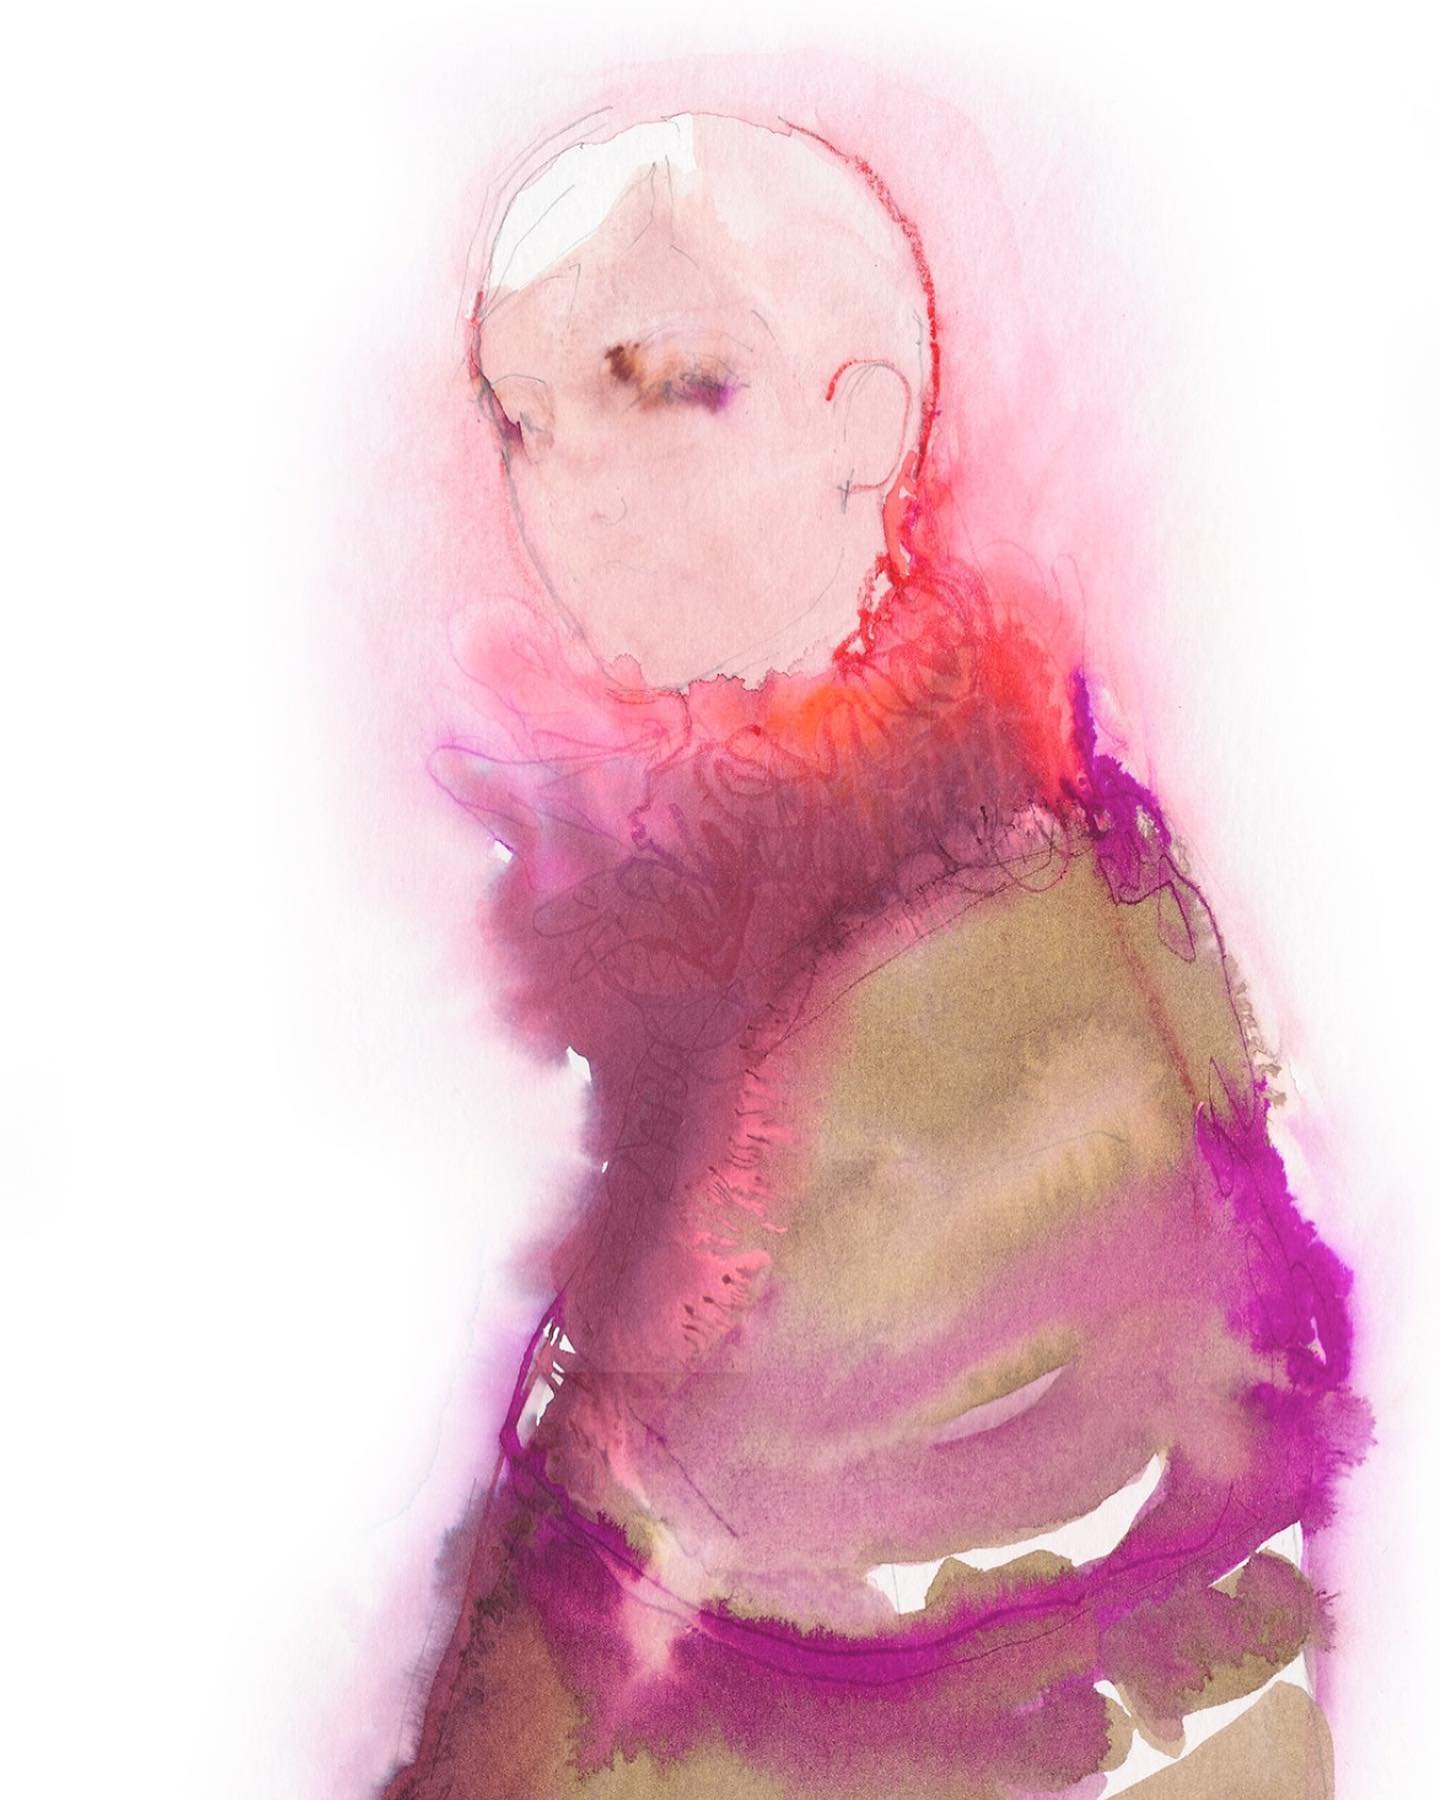 Glow #fashionisart #cateparr #watercolor #fashionillustration #fashionabstracted #red